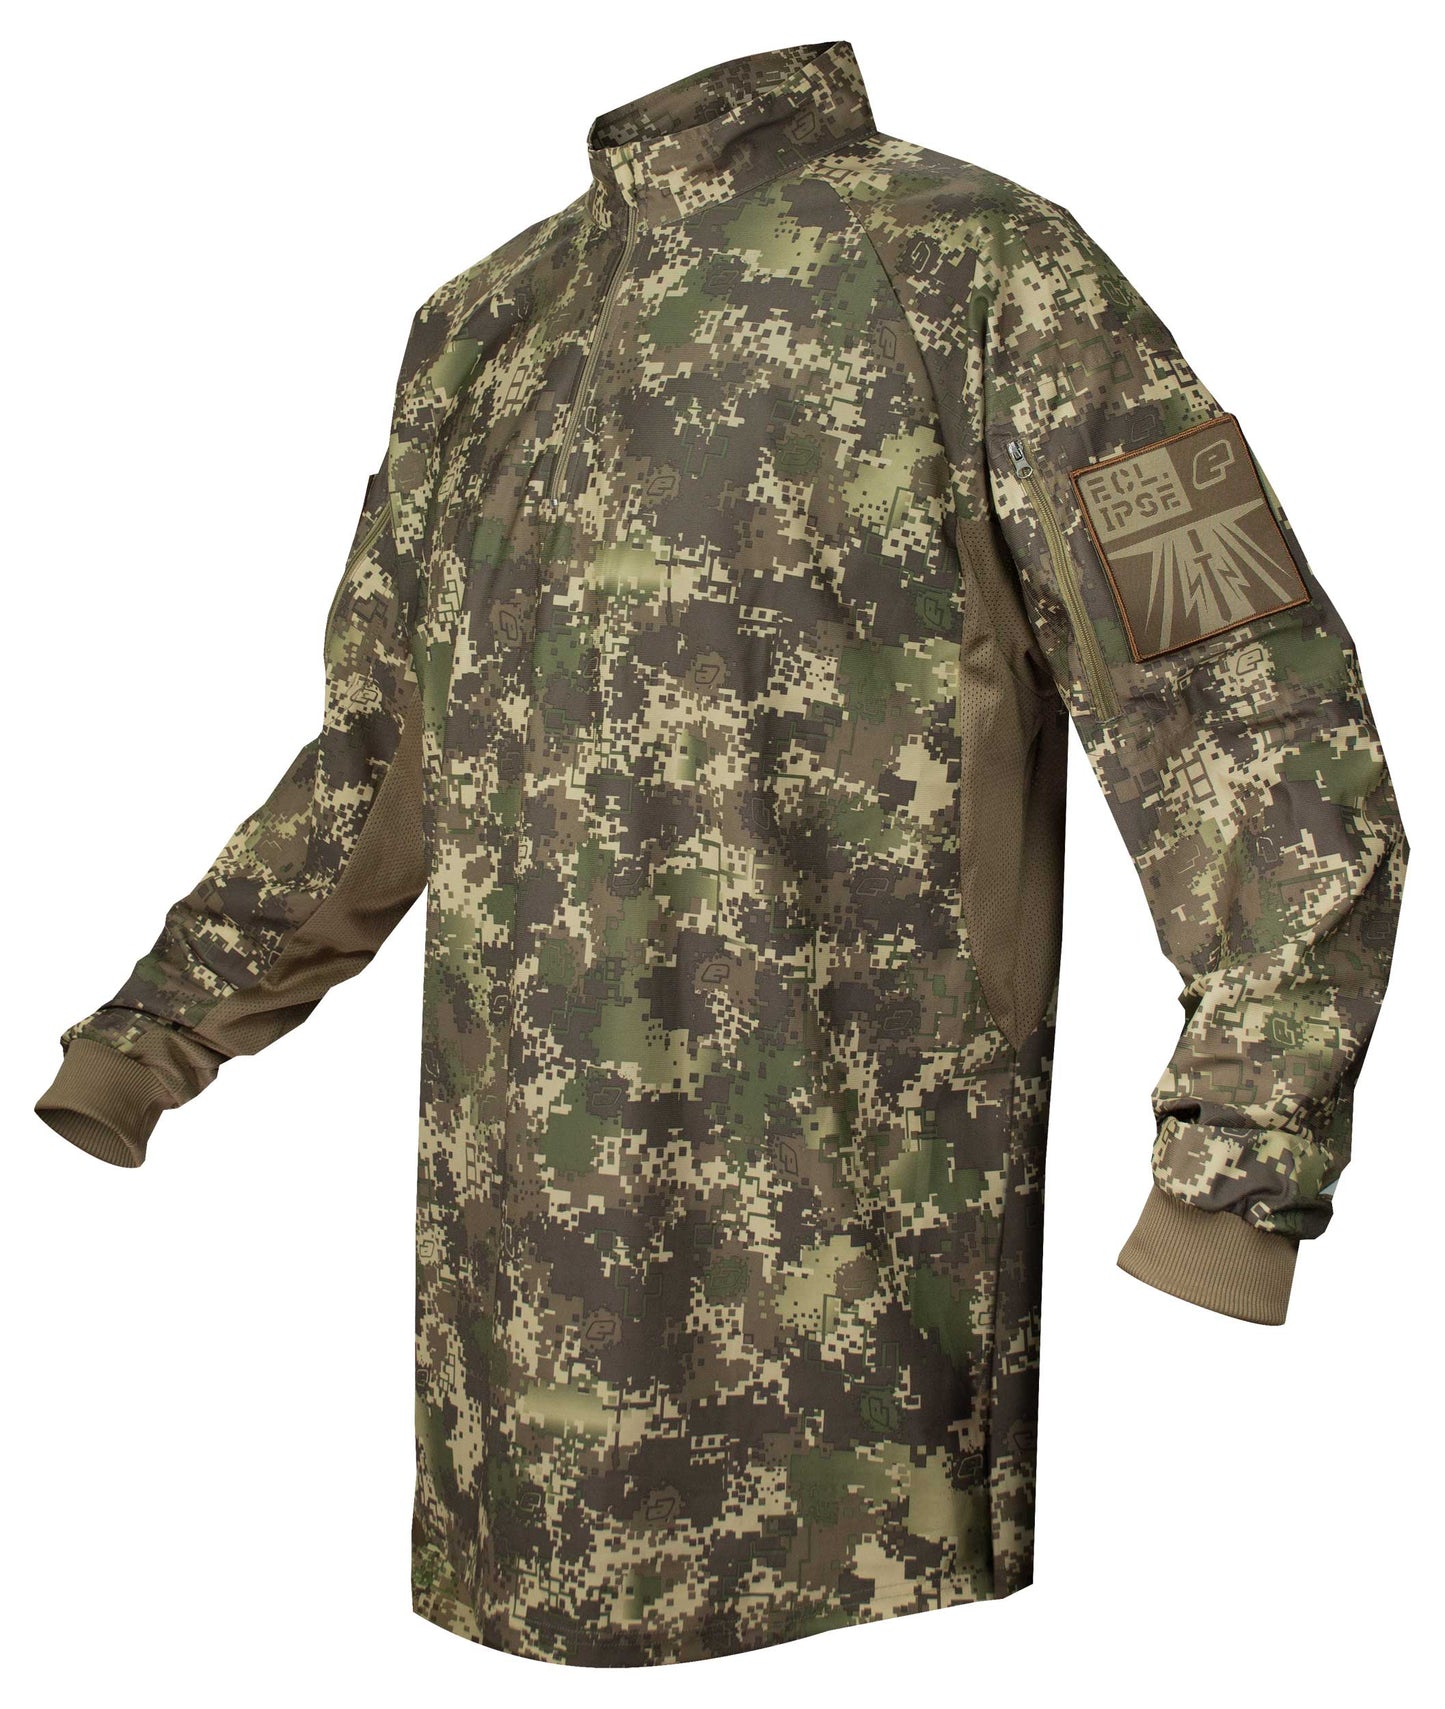 Planet Eclipse CR (Combat Ready) Paintball Jersey - Hde Urban